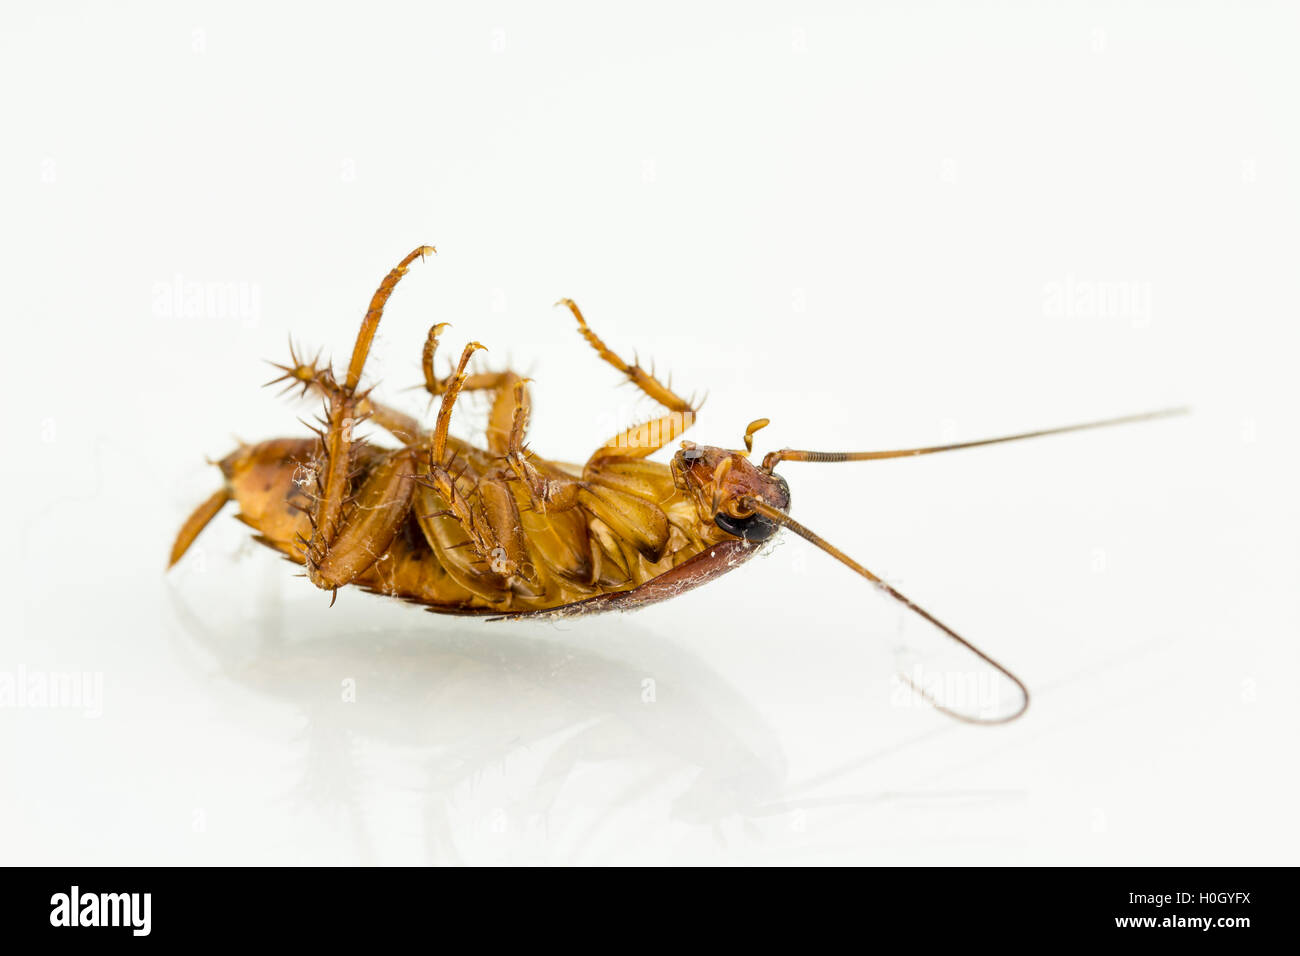 Dying cockroach with lint, upside down on back, with white background and glass reflection. Stock Photo